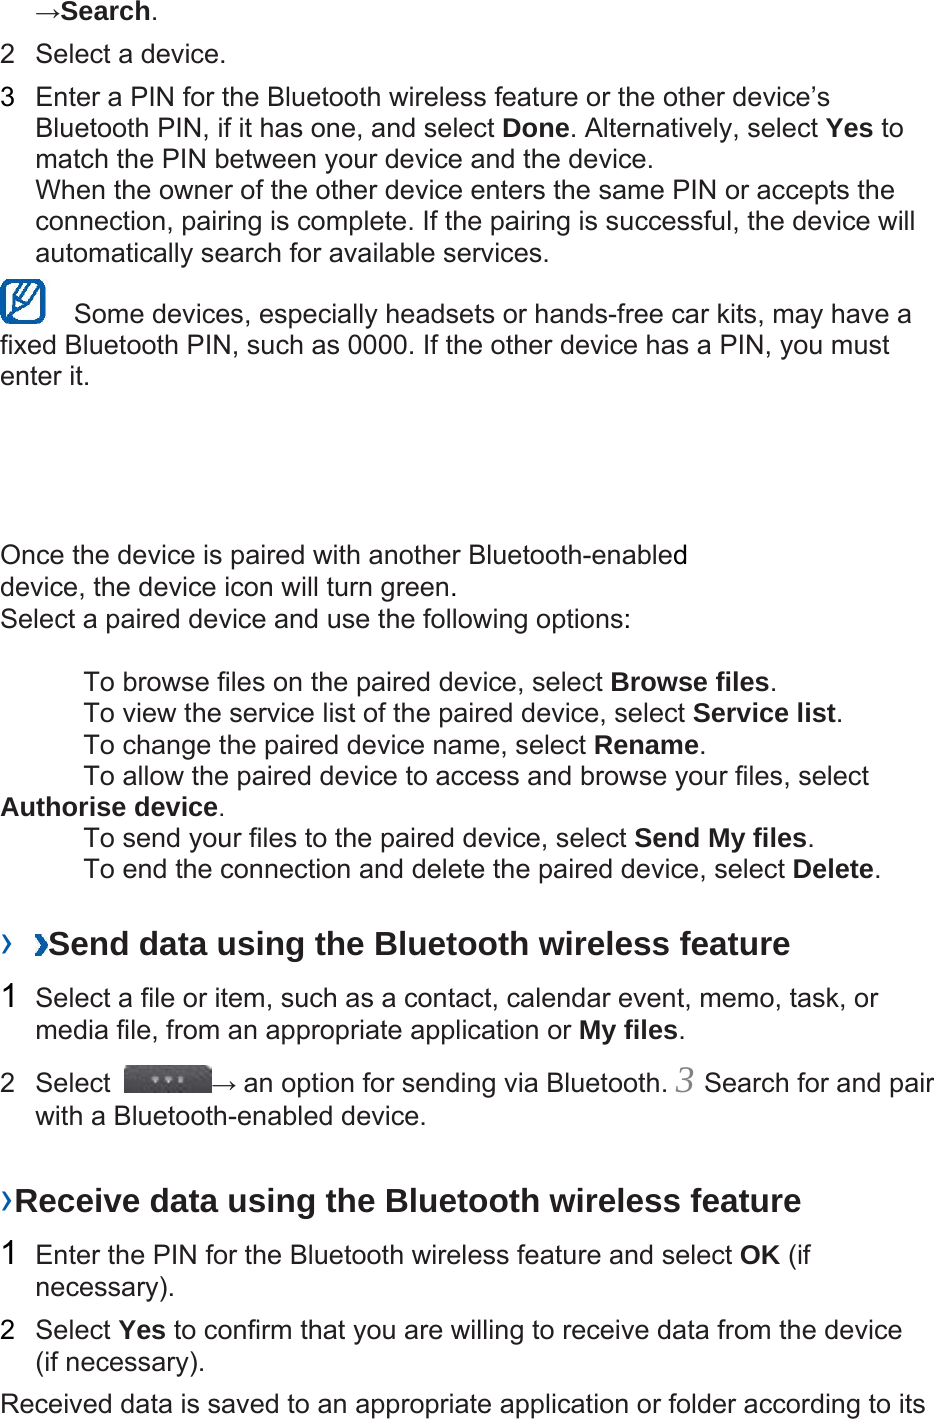 →Search.  2  Select a device.   3  Enter a PIN for the Bluetooth wireless feature or the other device’s Bluetooth PIN, if it has one, and select Done. Alternatively, select Yes to match the PIN between your device and the device.   When the owner of the other device enters the same PIN or accepts the connection, pairing is complete. If the pairing is successful, the device will automatically search for available services.     Some devices, especially headsets or hands-free car kits, may have a fixed Bluetooth PIN, such as 0000. If the other device has a PIN, you must enter it.   Once the device is paired with another Bluetooth-enabled device, the device icon will turn green. Select a paired device and use the following options:    To browse files on the paired device, select Browse files.    To view the service list of the paired device, select Service list.    To change the paired device name, select Rename.   To allow the paired device to access and browse your files, select Authorise device.    To send your files to the paired device, select Send My files.    To end the connection and delete the paired device, select Delete.   ›  Send data using the Bluetooth wireless feature   1  Select a file or item, such as a contact, calendar event, memo, task, or media file, from an appropriate application or My files.  2 Select  → an option for sending via Bluetooth. 3 Search for and pair with a Bluetooth-enabled device.   ›Receive data using the Bluetooth wireless feature   1  Enter the PIN for the Bluetooth wireless feature and select OK (if necessary).  2  Select Yes to confirm that you are willing to receive data from the device (if necessary).   Received data is saved to an appropriate application or folder according to its 